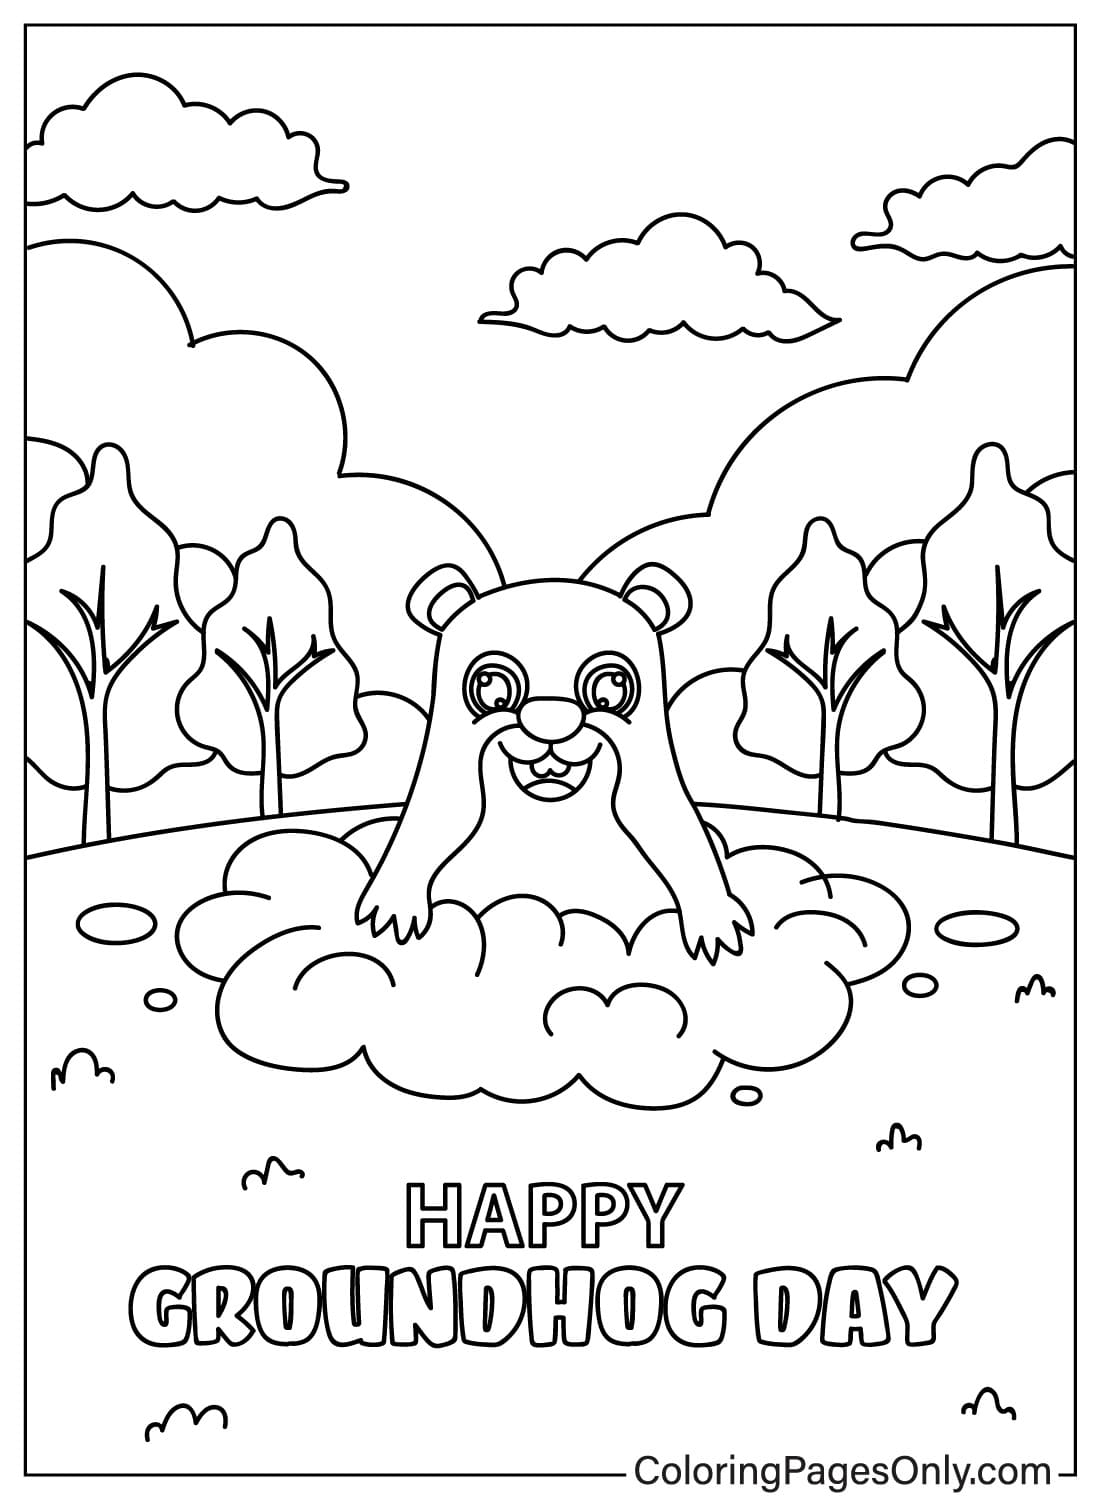 Images Groundhog Day Coloring Page from Groundhog Day